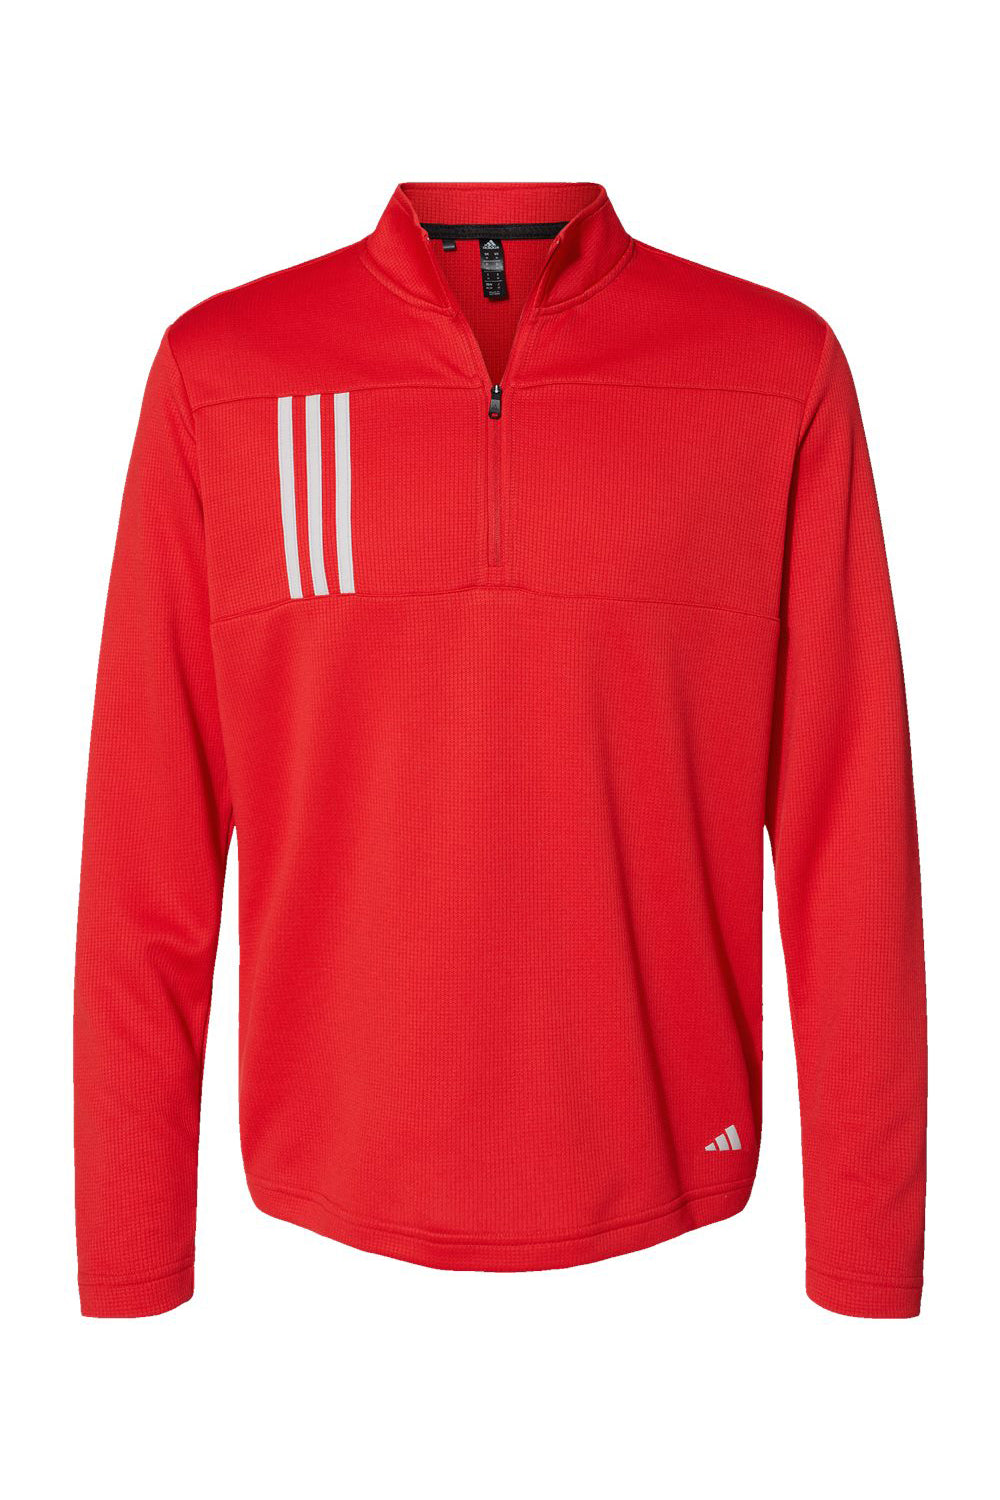 Adidas A482 Mens 3 Stripes Double Knit Moisture Wicking 1/4 Zip Sweatshirt Team Collegiate Red/Grey Flat Front